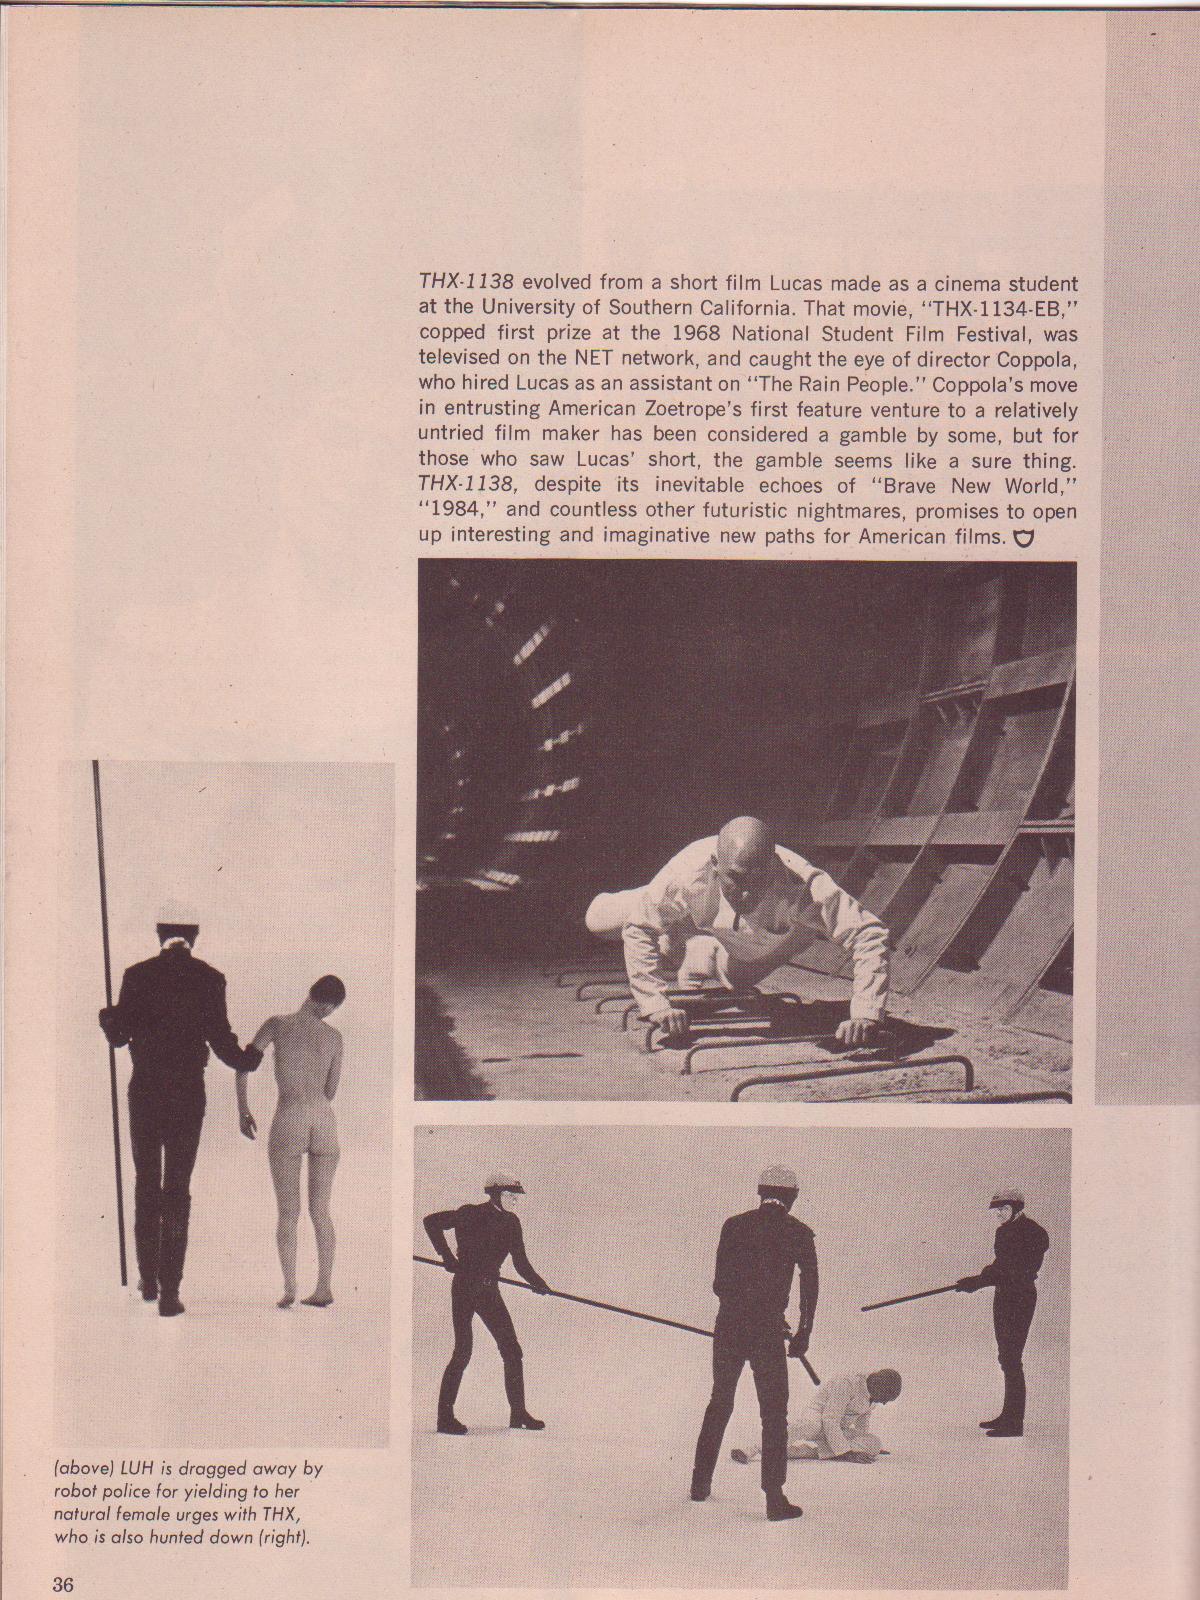 Knight November 1970 -- Unedited Chapter from Post Office by Charles Bukowski, Plus Spread on  George Lucas and THX 1138